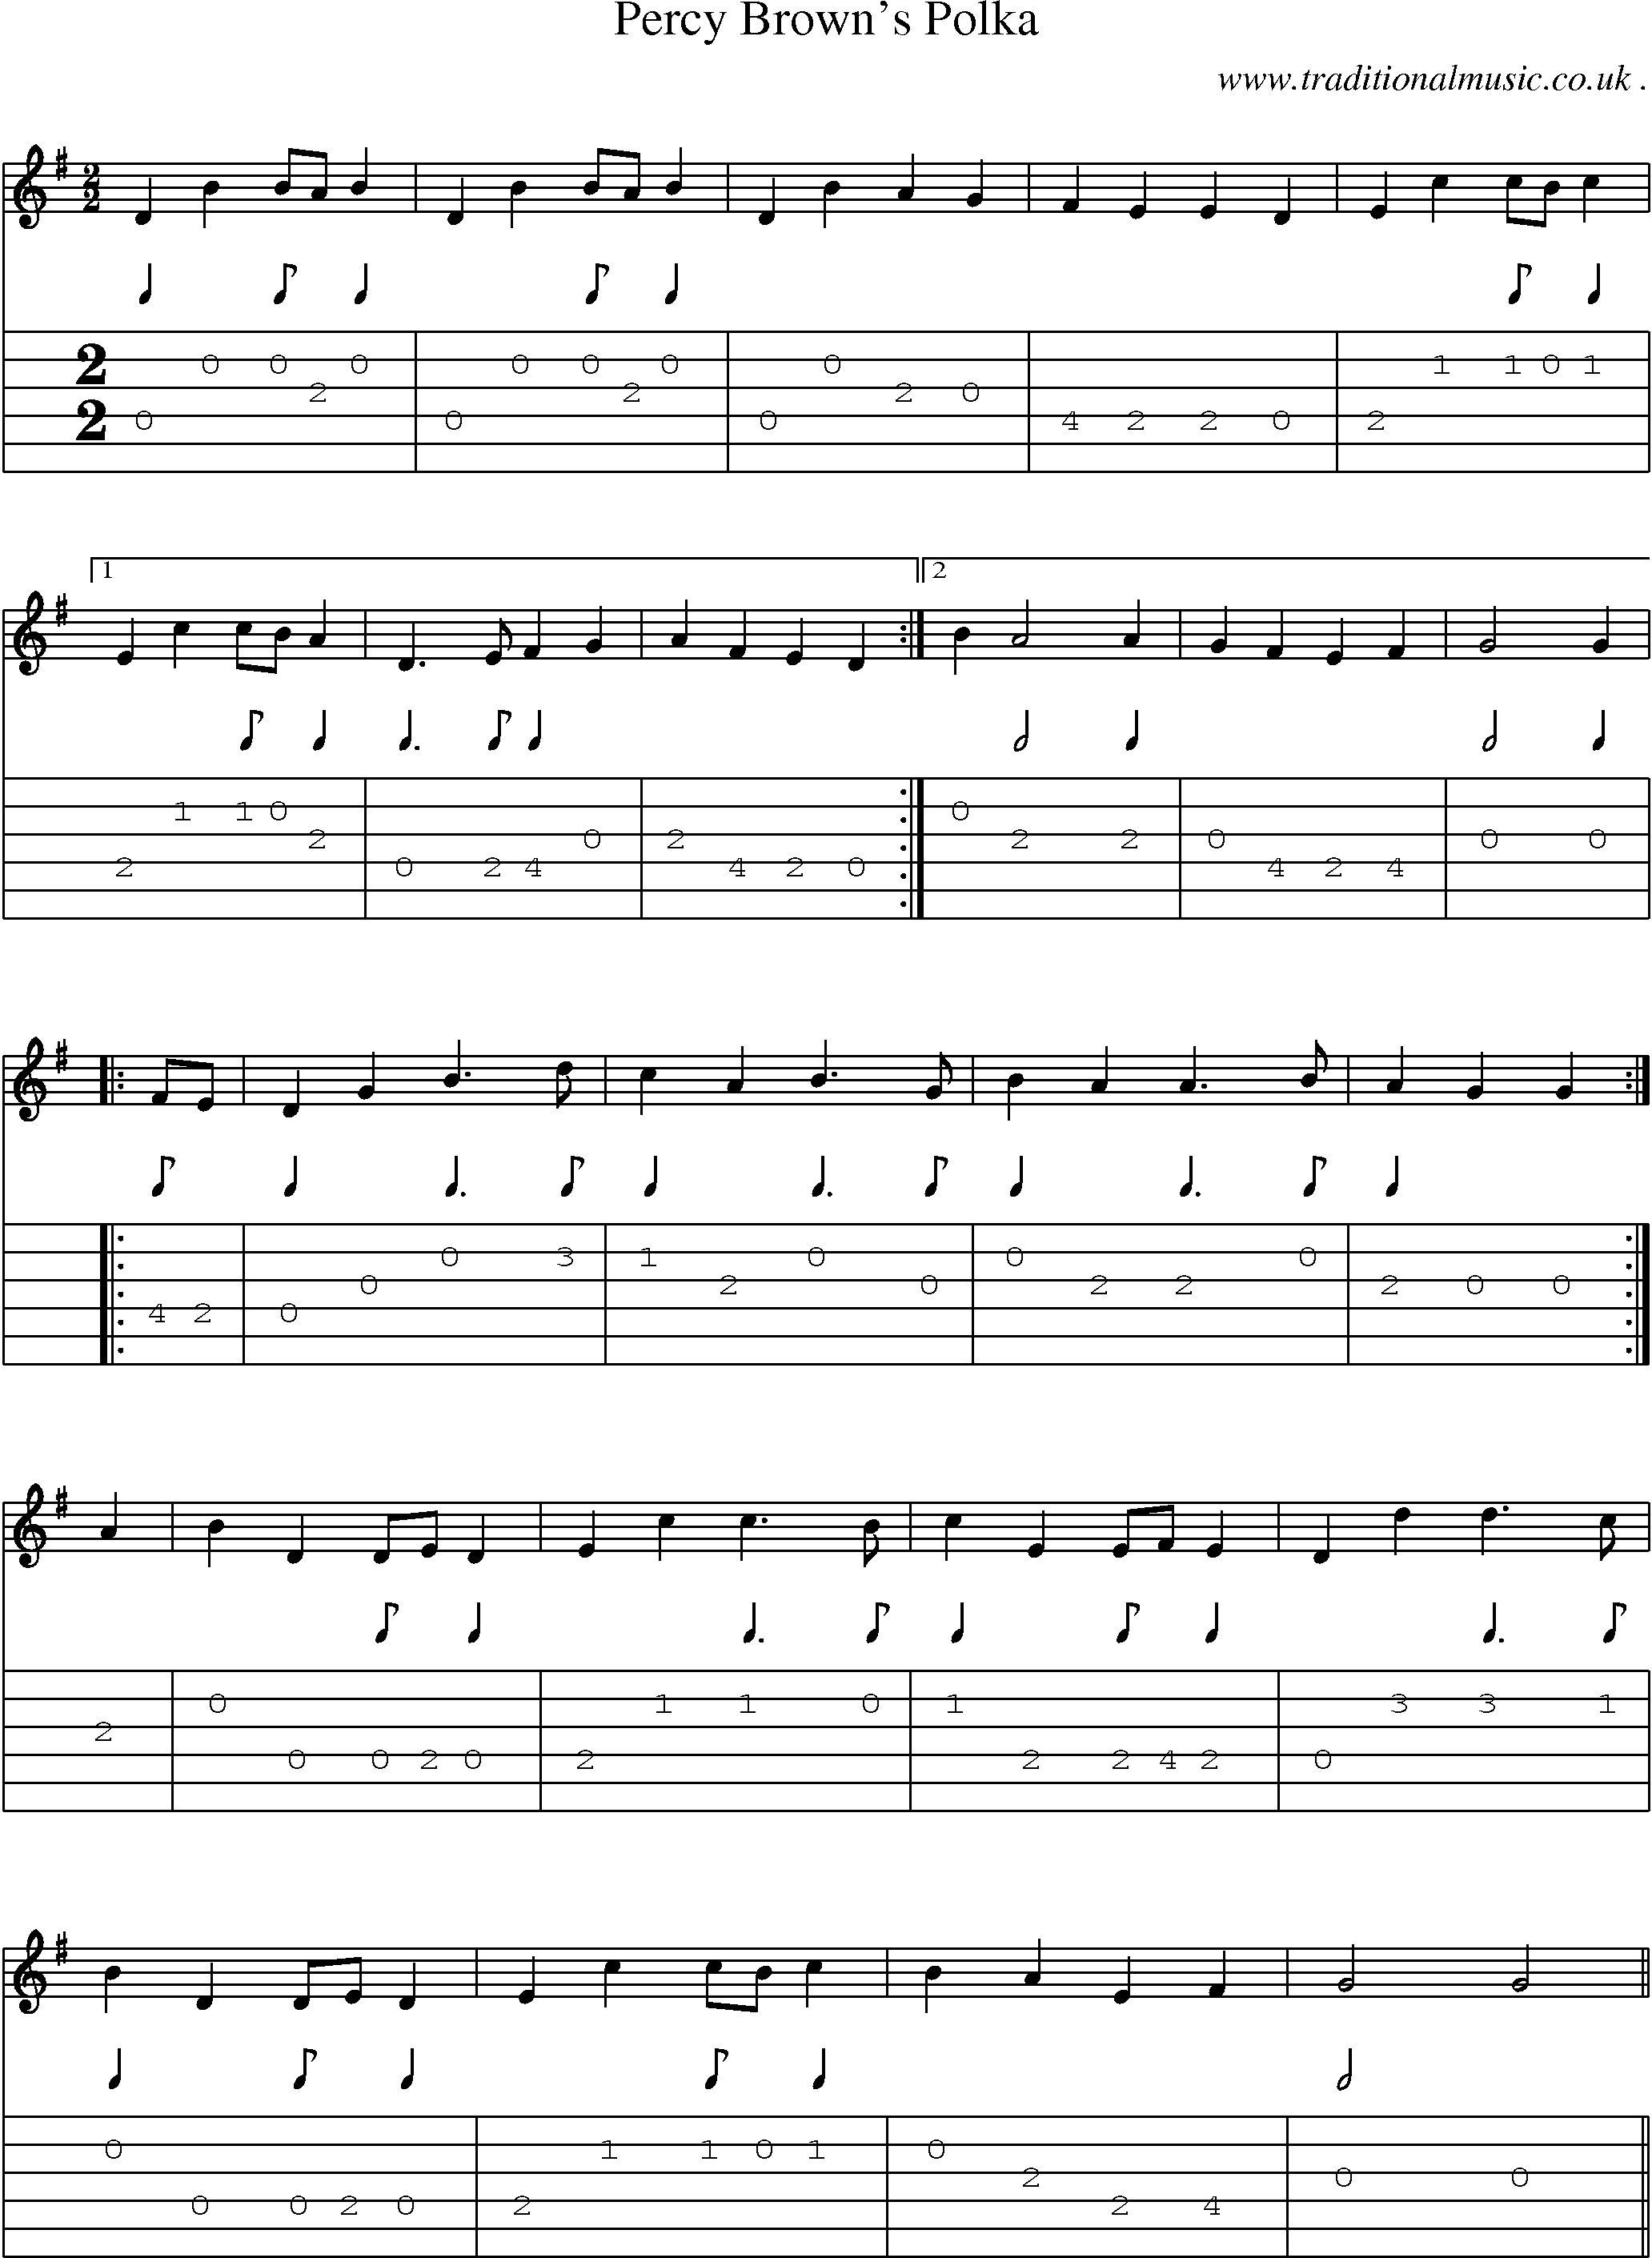 Sheet-Music and Guitar Tabs for Percy Browns Polka